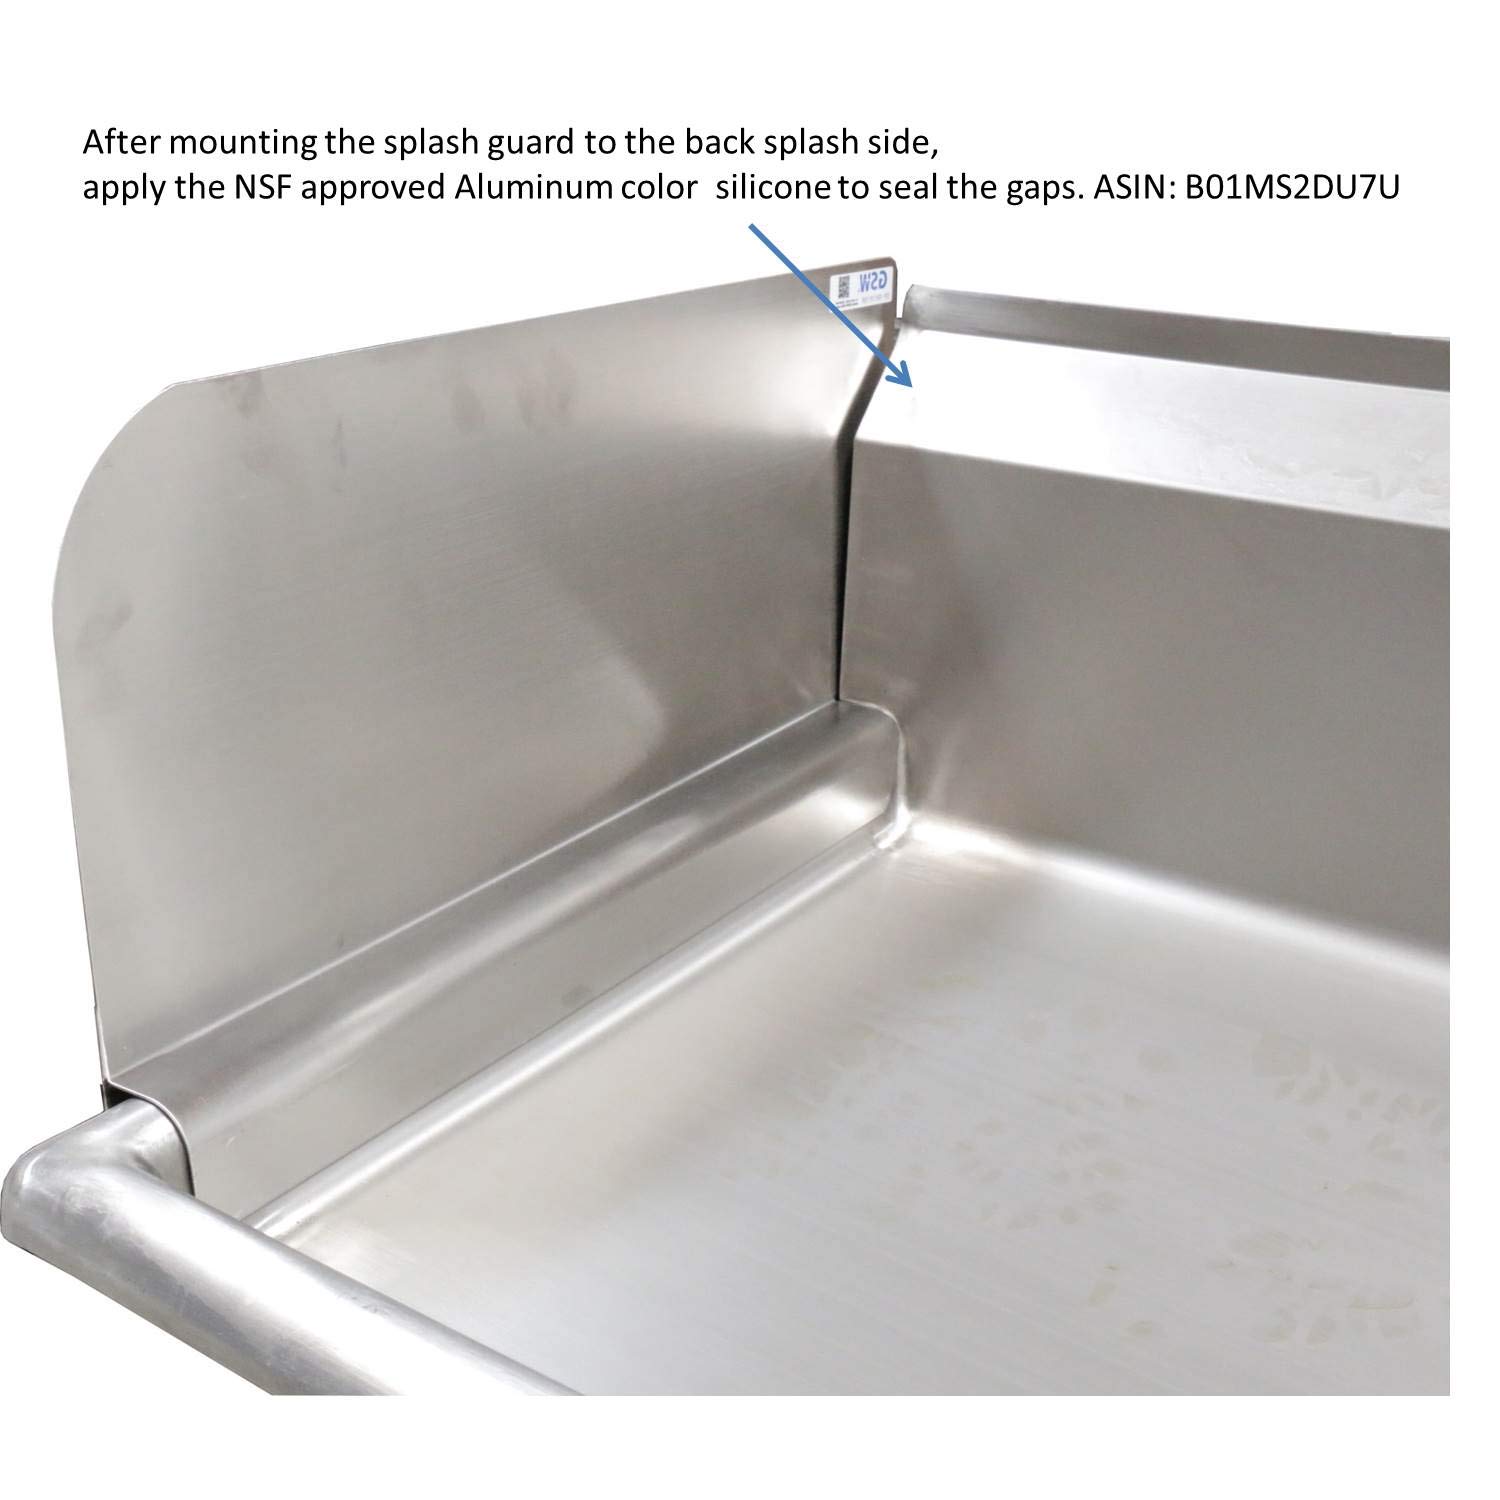 Stainless Steel Insert Type Splash Guard for Compartment Sinks (22"L x 11"H Left)